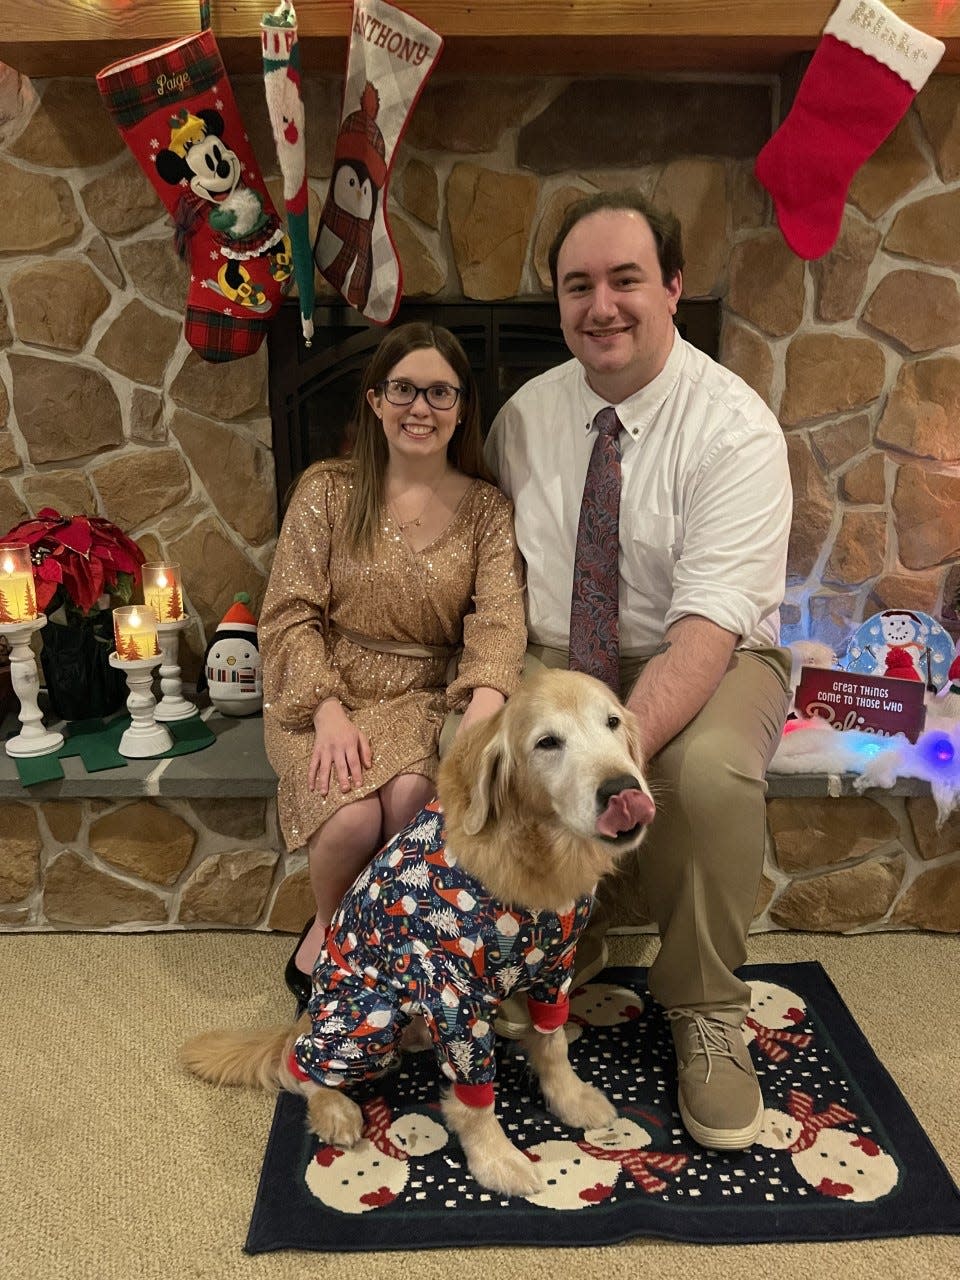 Blair and her fiance, along with Blair's service dog Creed